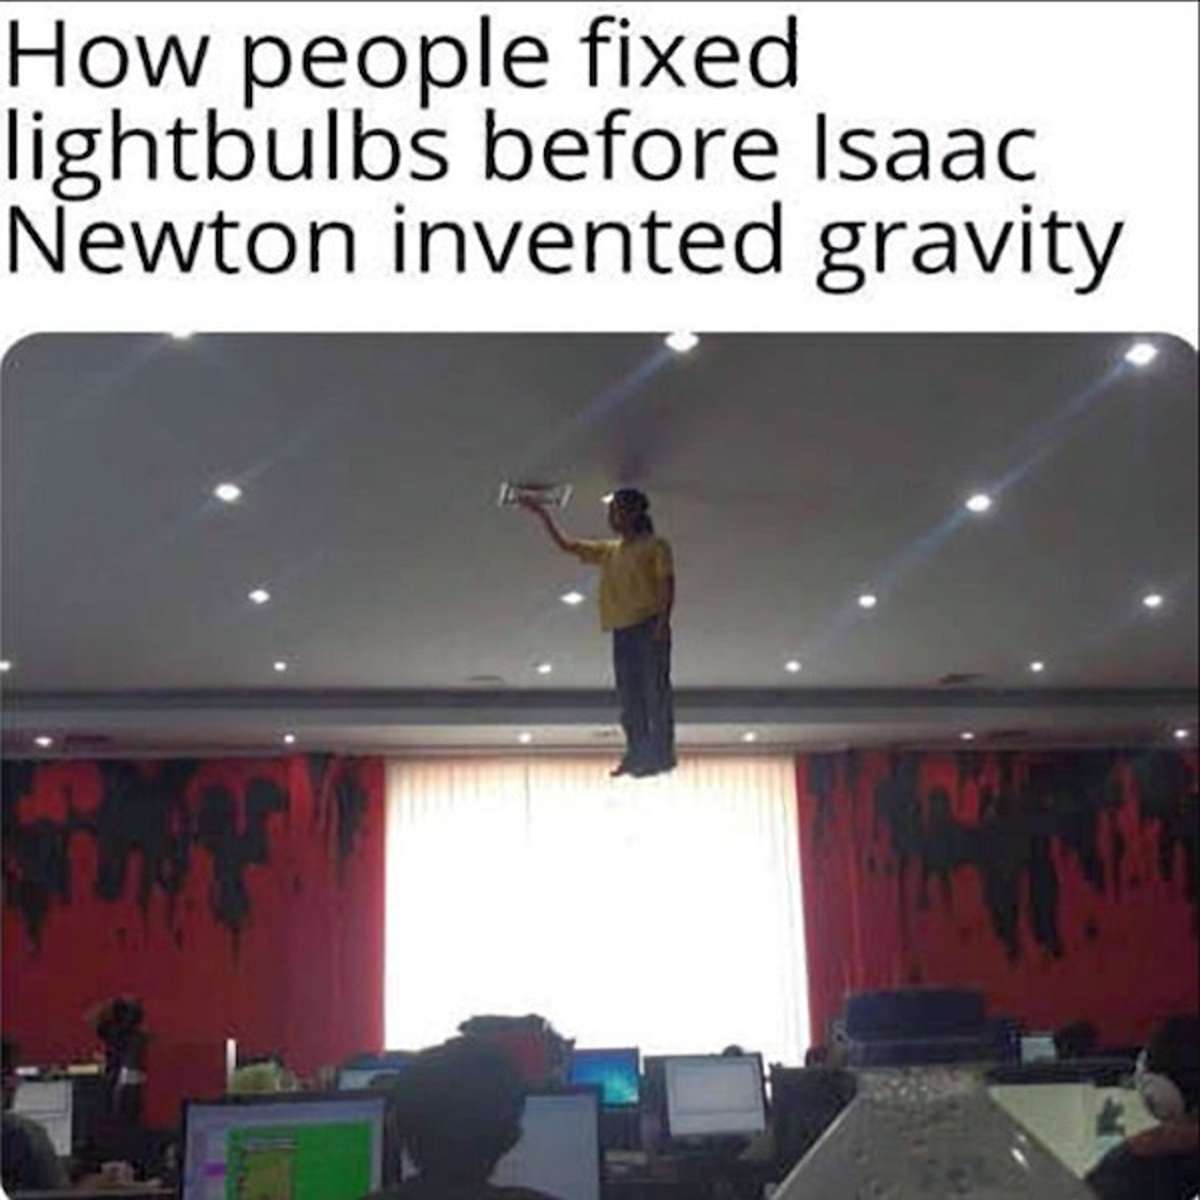 fresh memes - people fixed lightbulb before newton invented gravity - How people fixed lightbulbs before Isaac Newton invented gravity